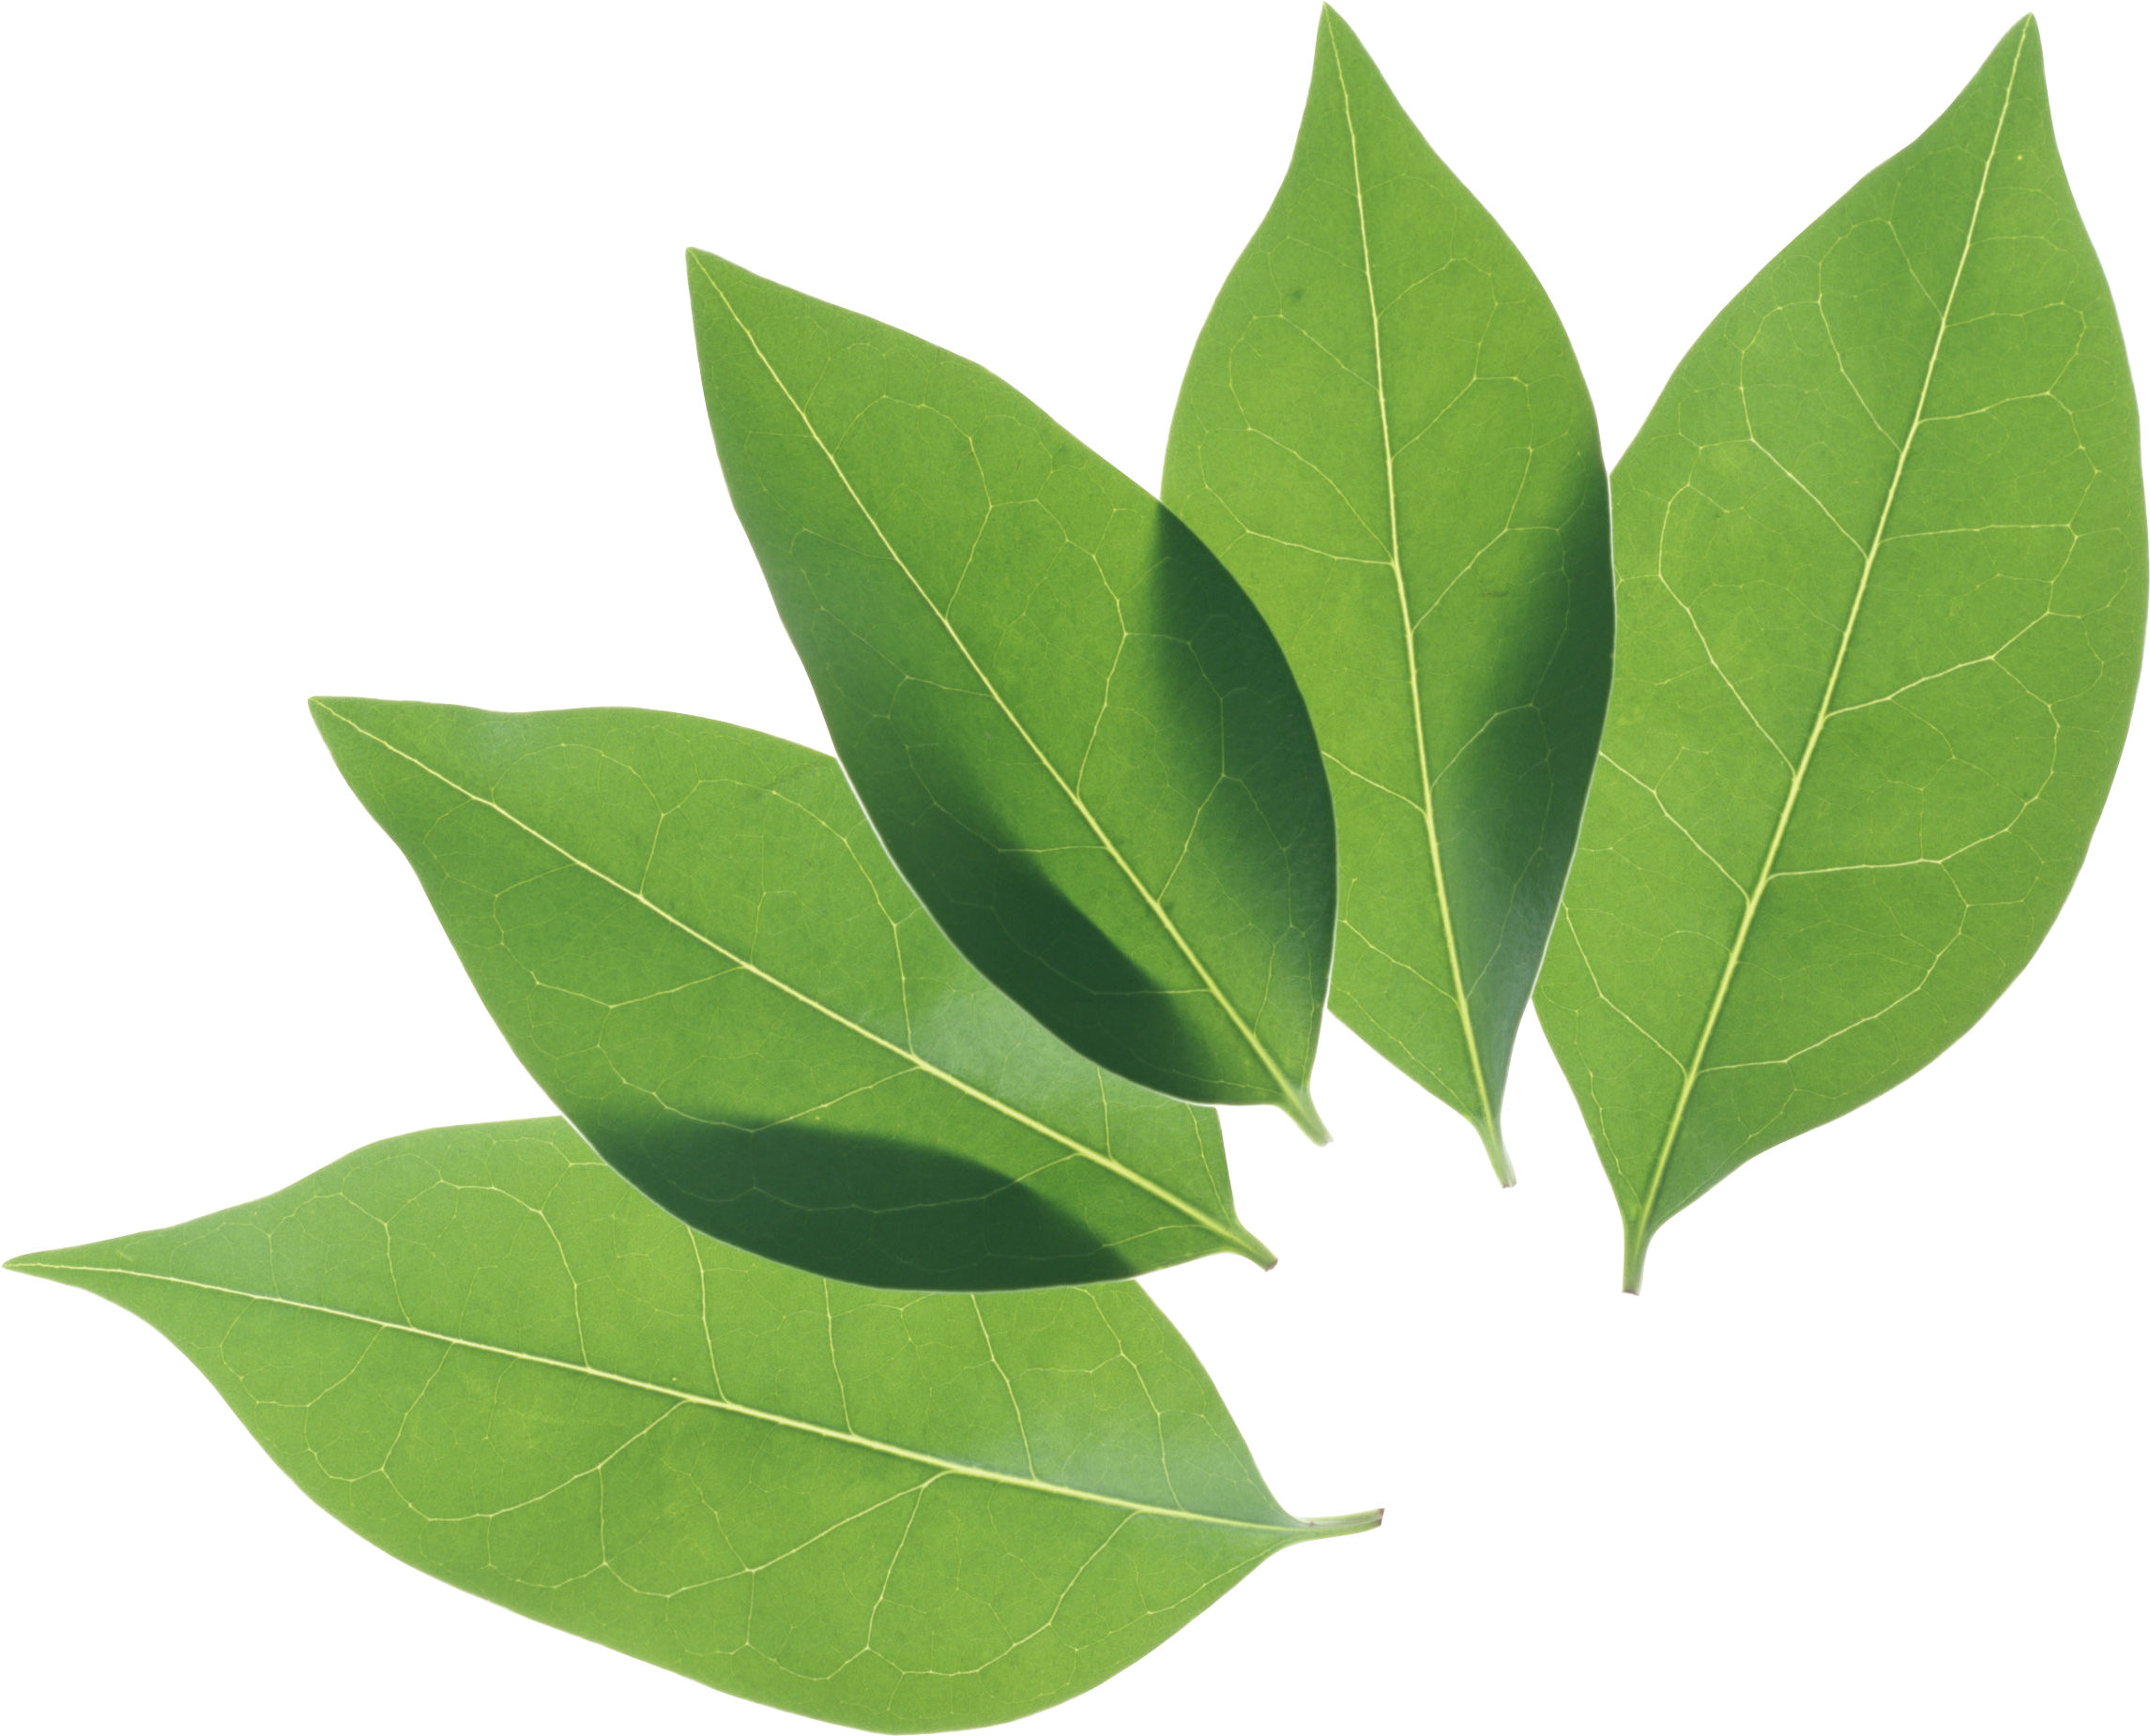 Green twenty one isolated. Leaves clipart bay leaves